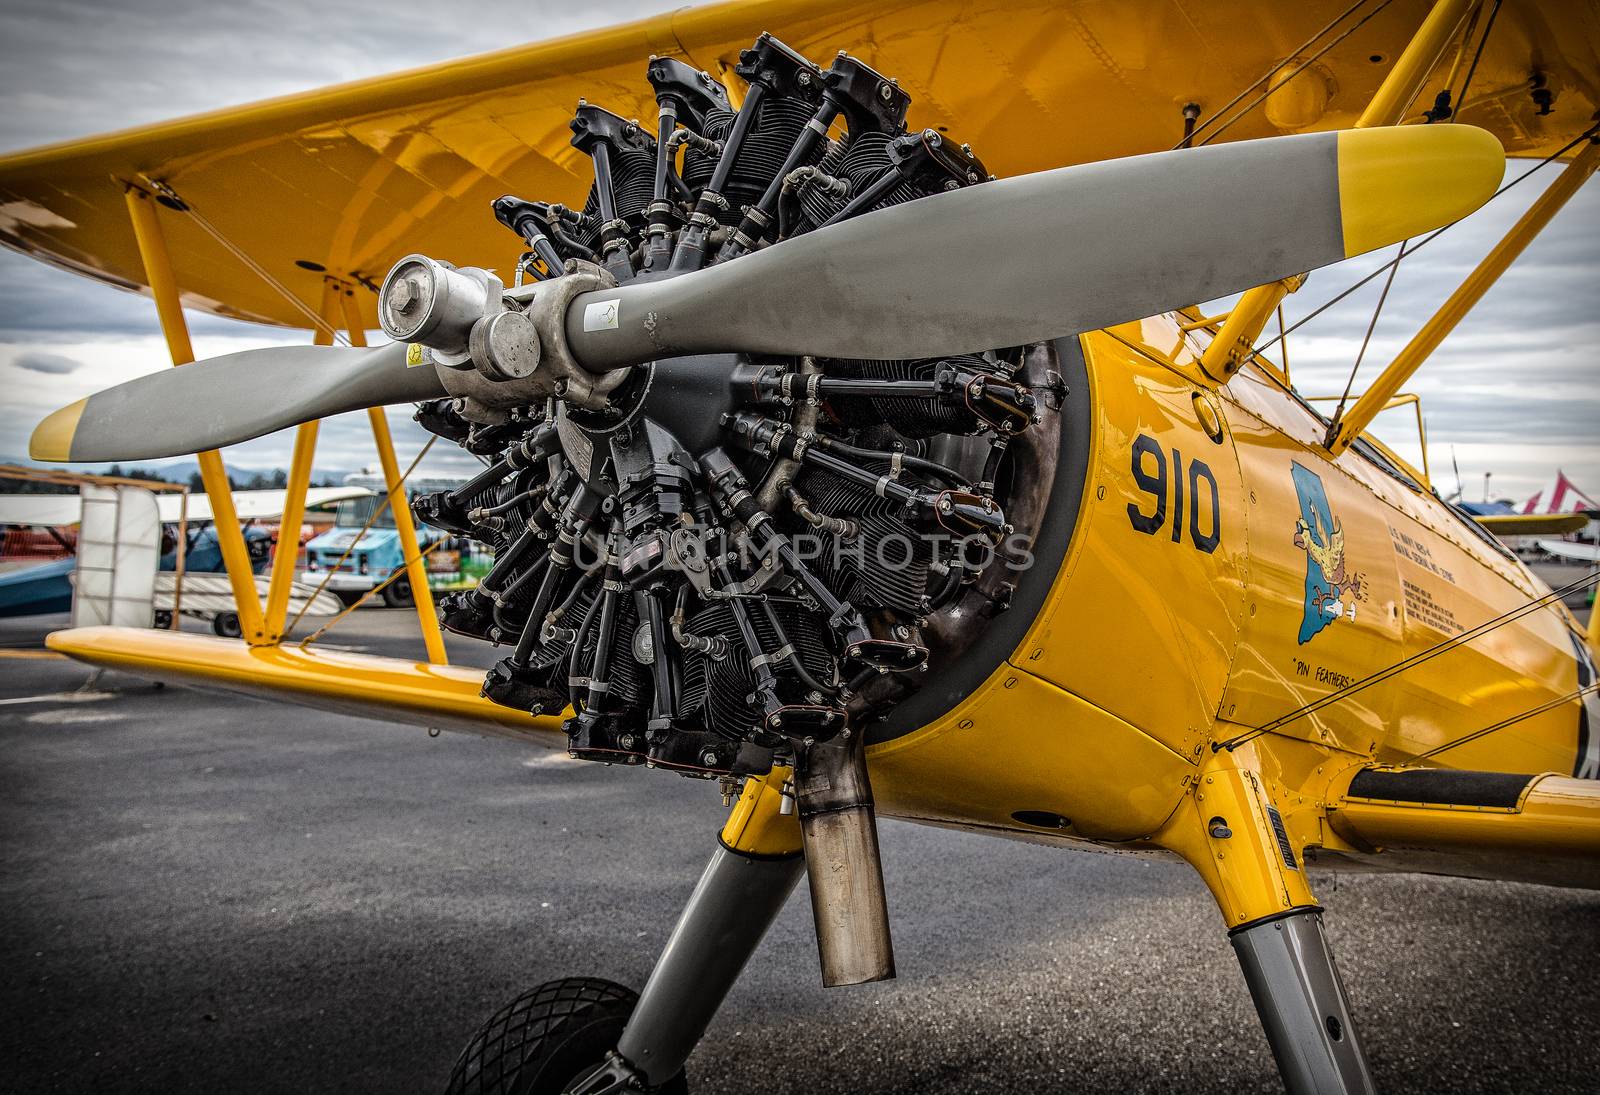 Redding, California, USA- September 28, 2014: A high performance stunt biplane and its engine are on display at an airshow in Northern California.